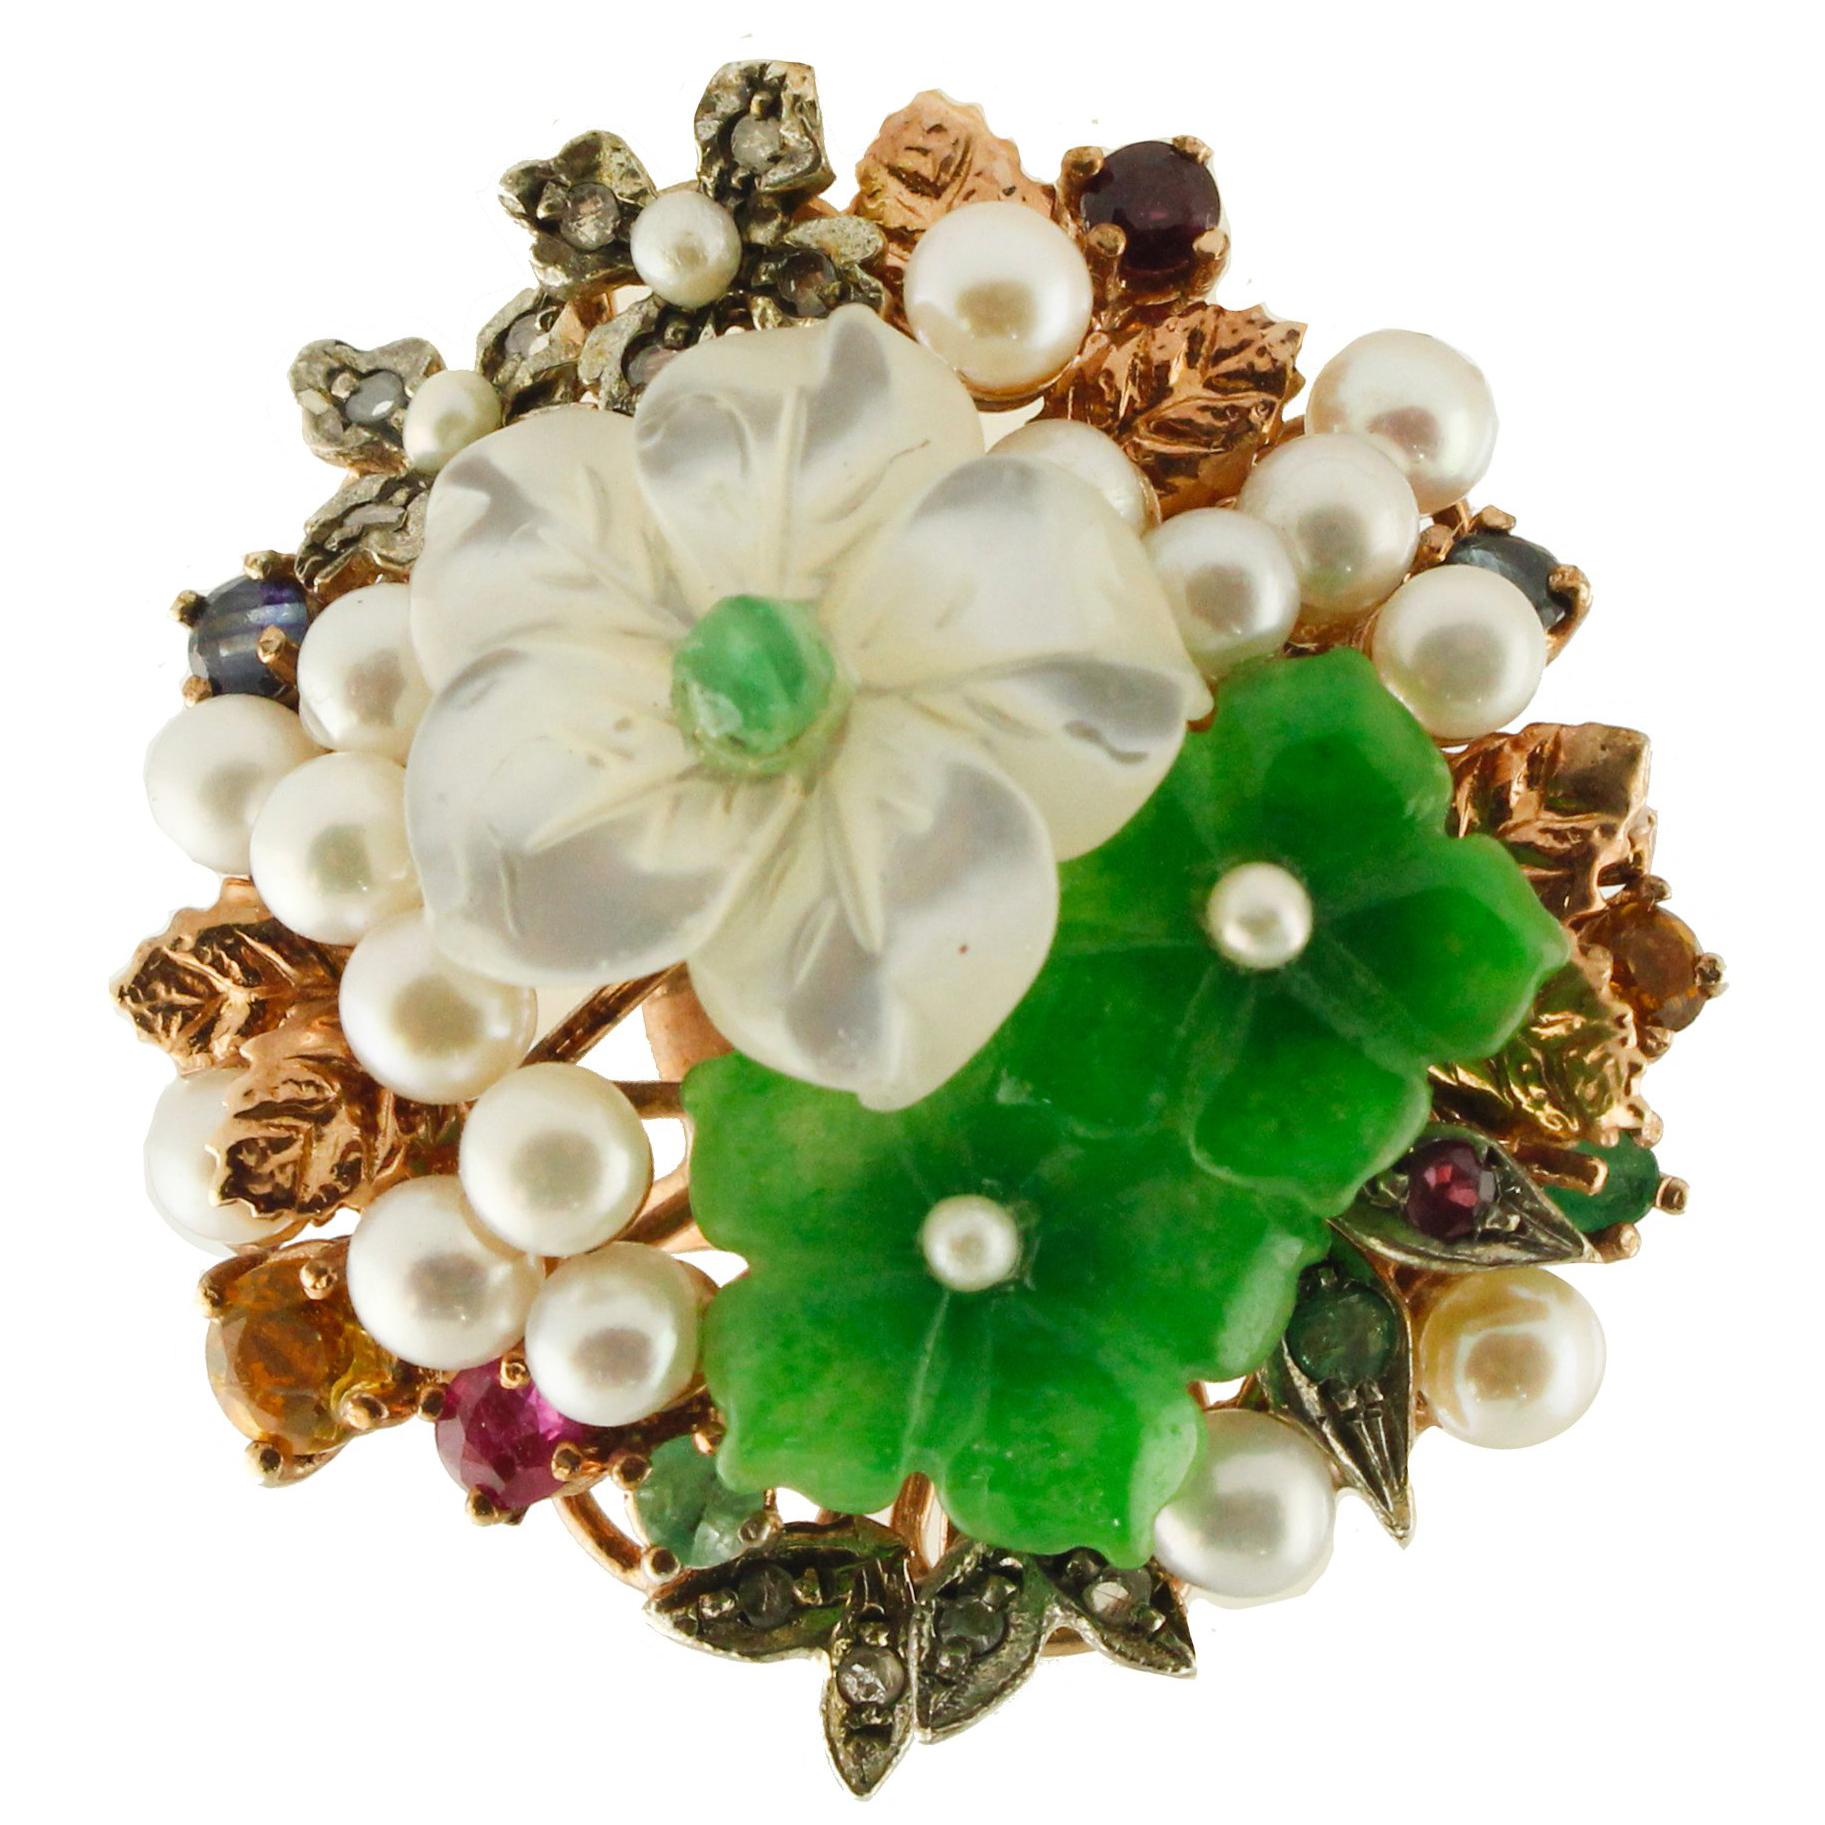 Diamonds Rubies Emeralds Sapphires Green Agate White Stones Gold Silver Ring